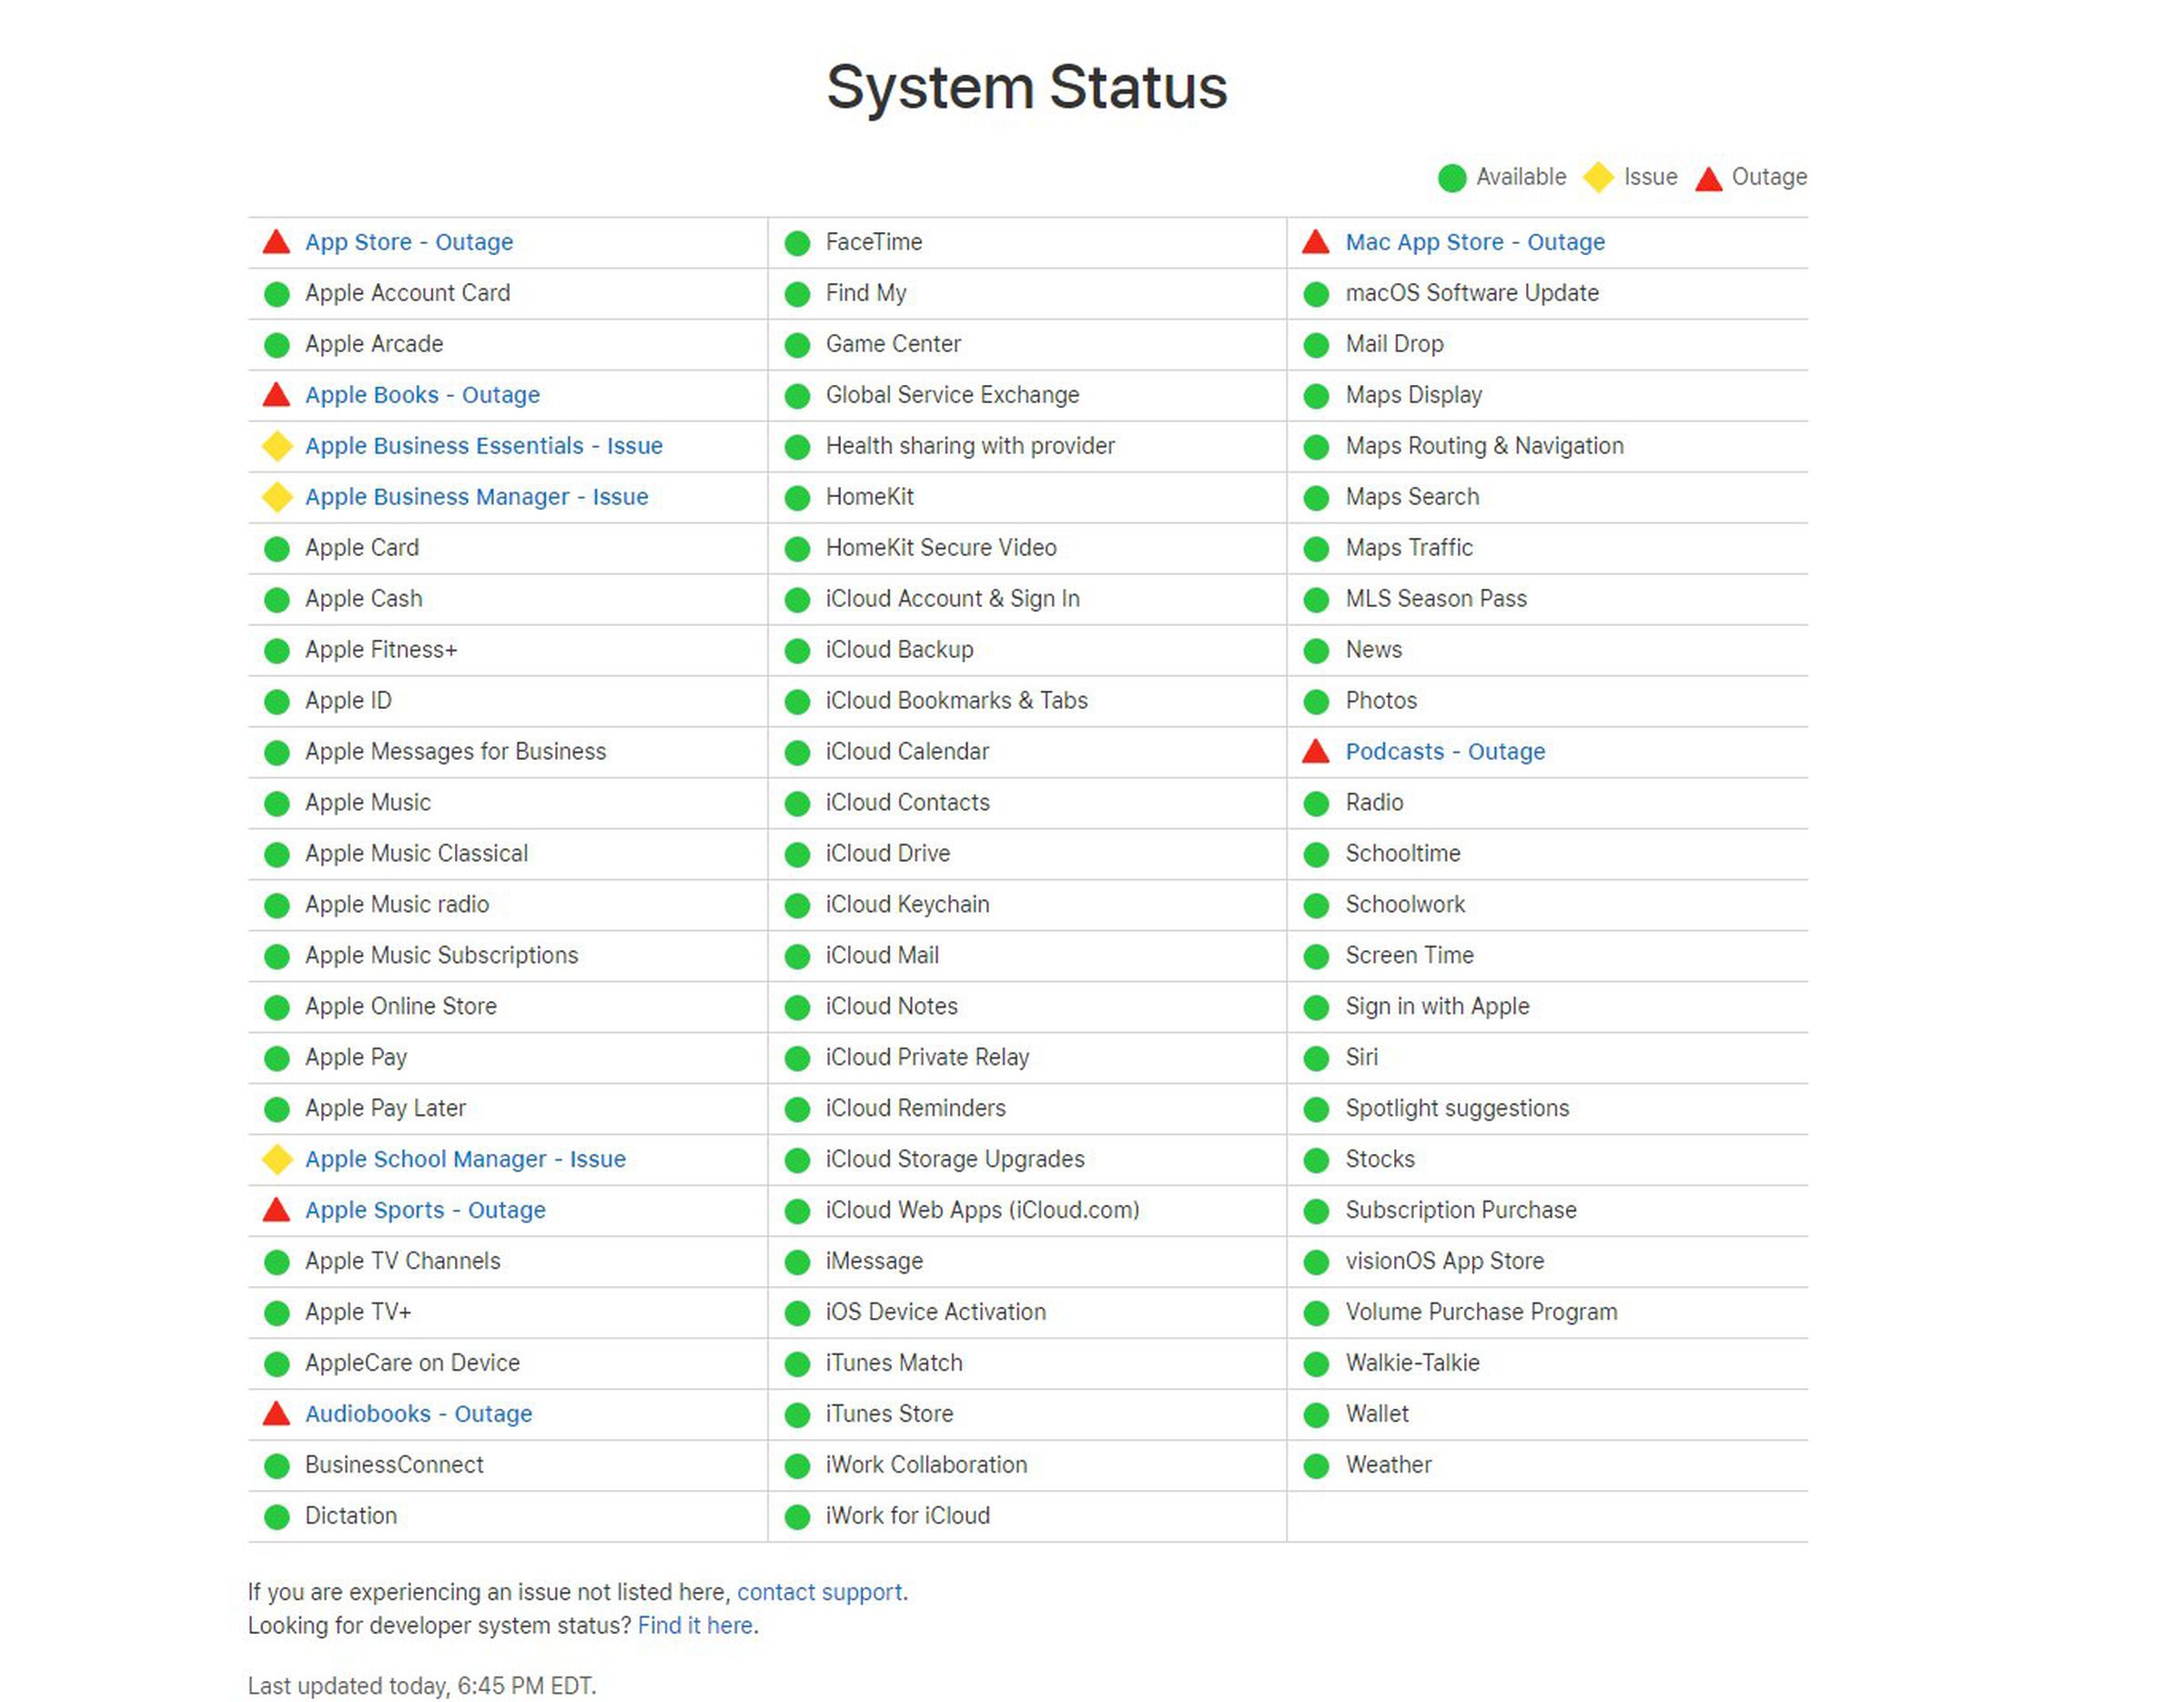 Screenshot of Apple’s system status page showing red outage flags for several services.